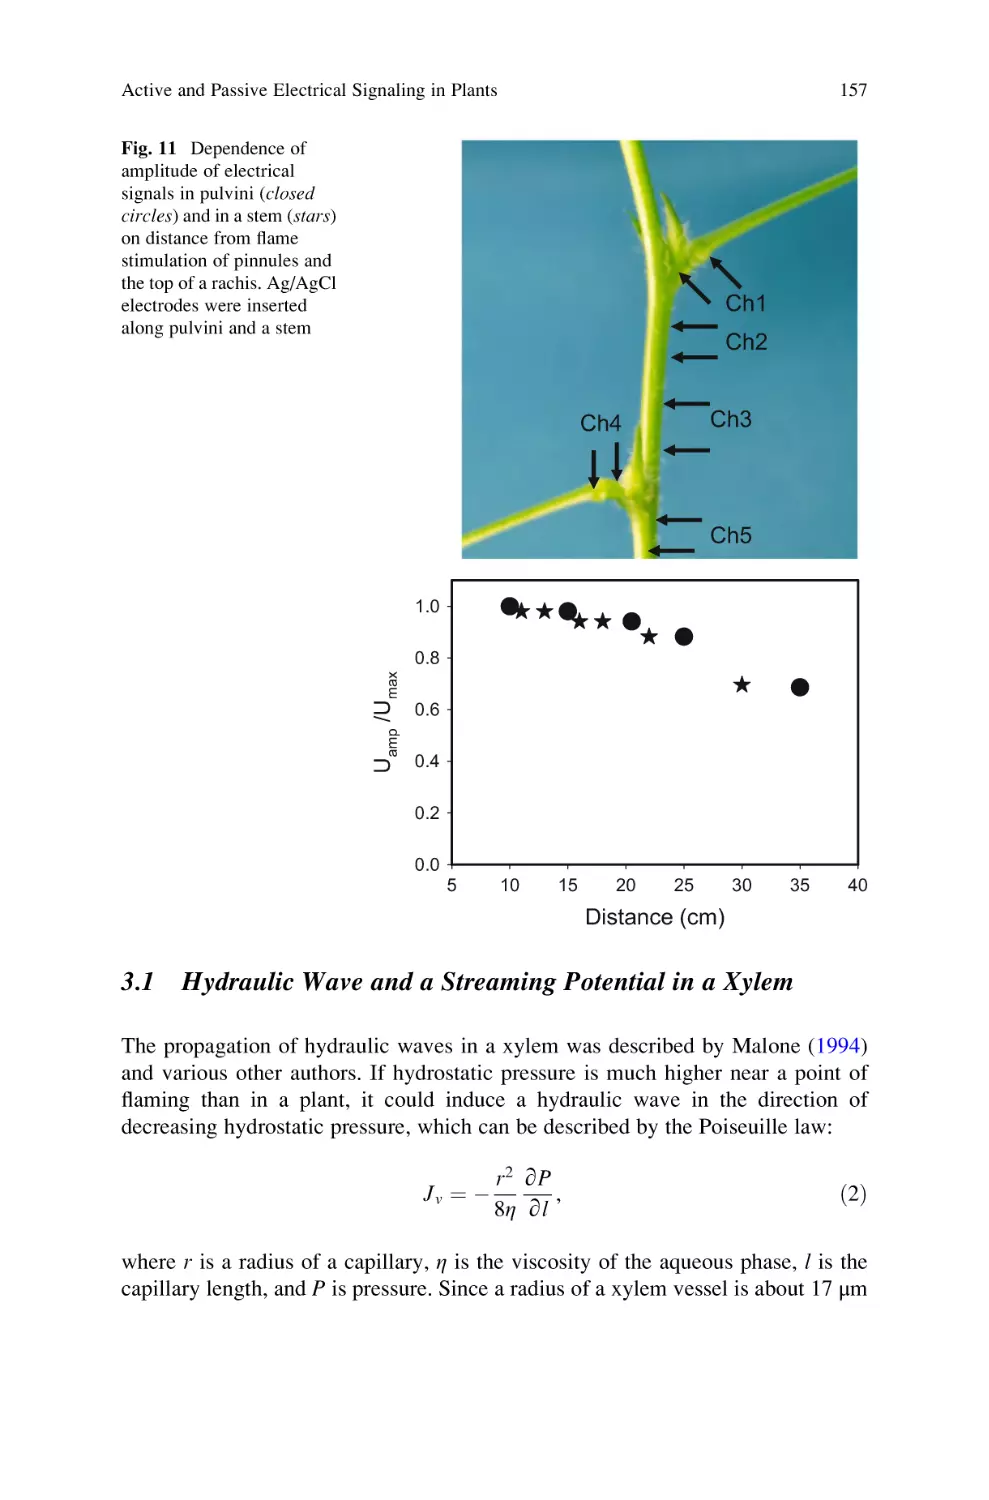 3.1 Hydraulic Wave and a Streaming Potential in a Xylem